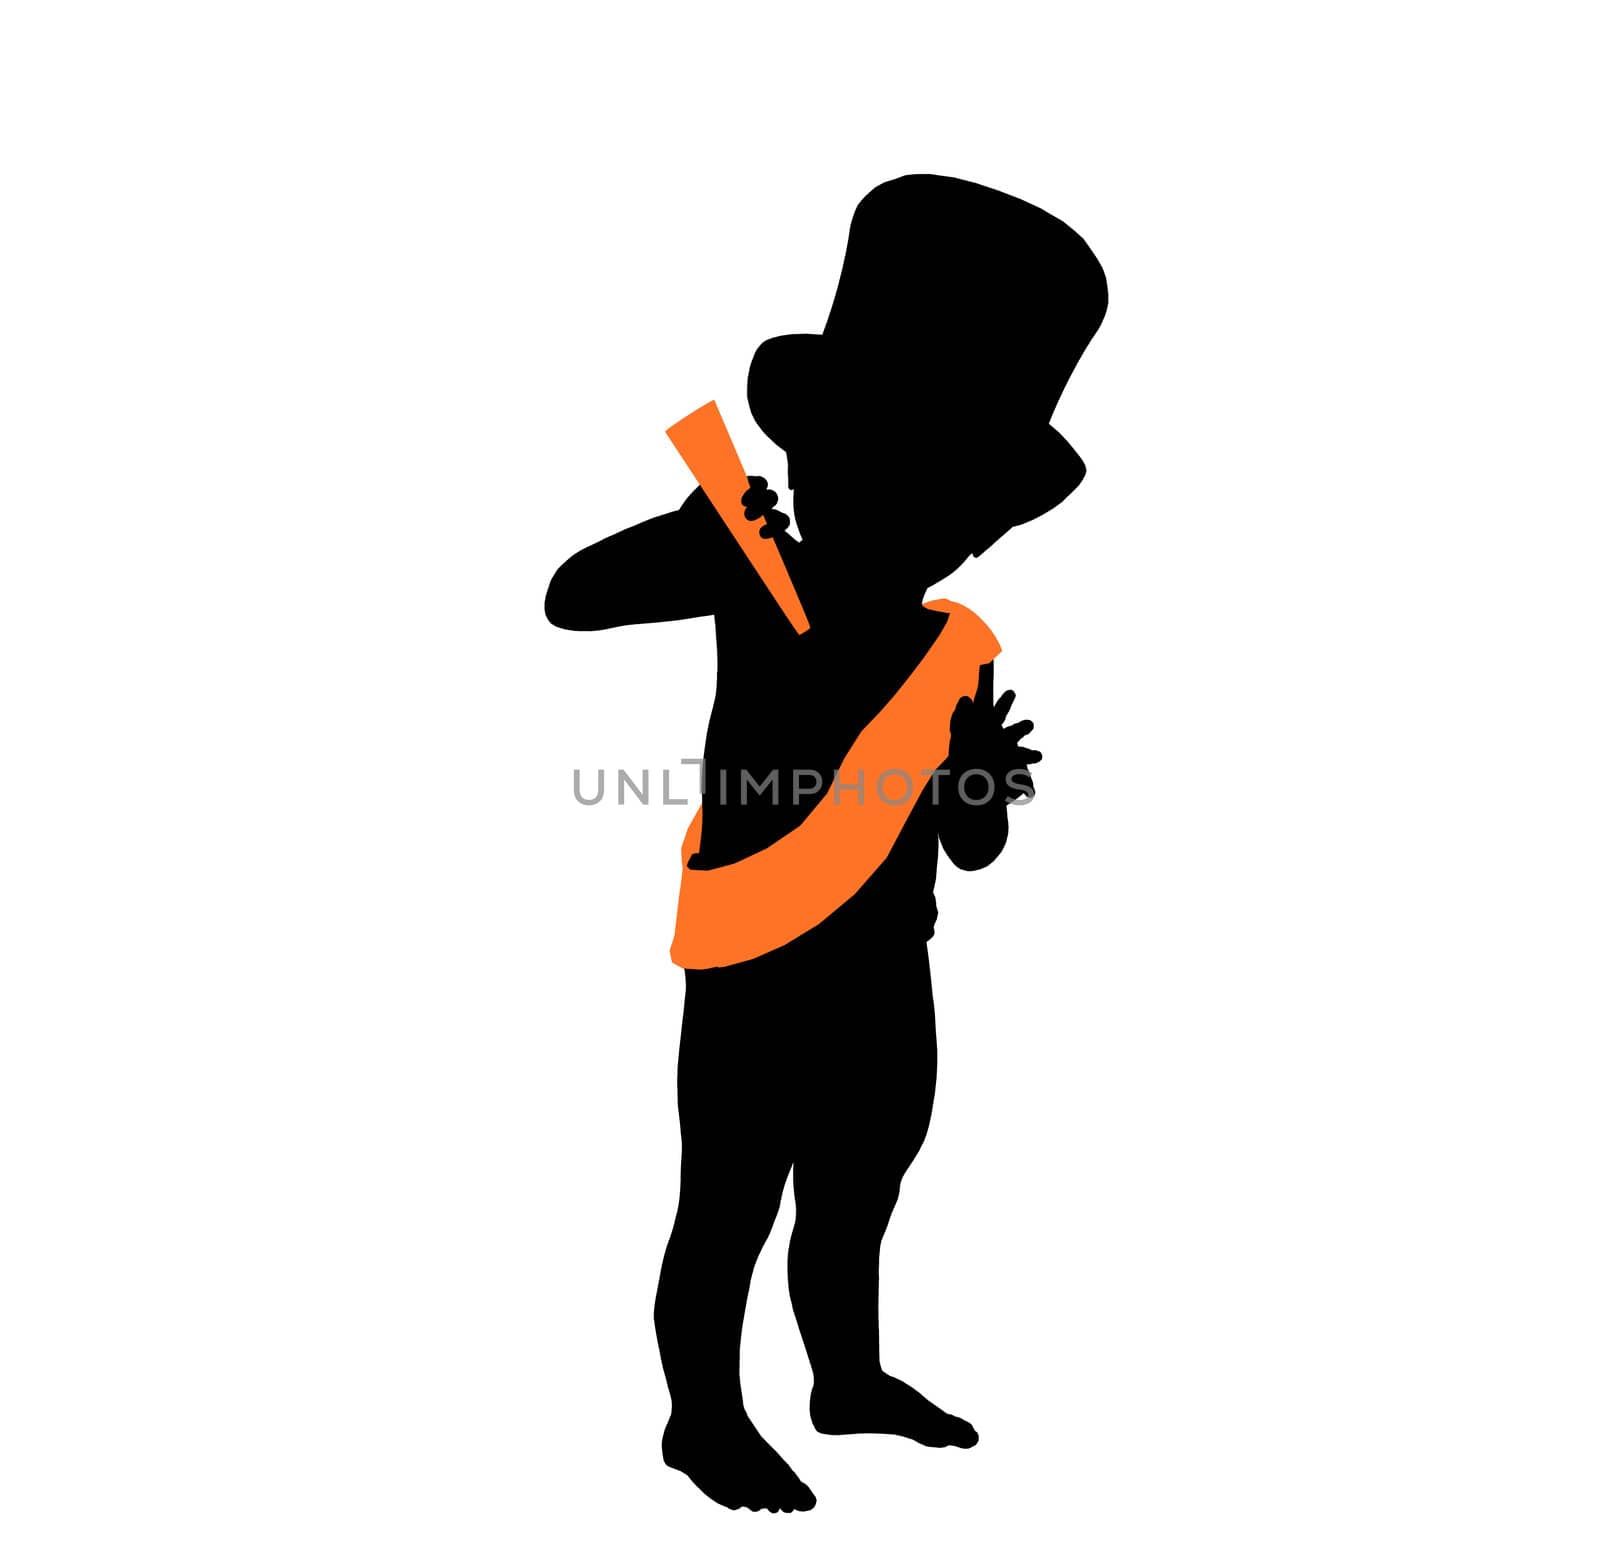 New years baby silhouette on a white background